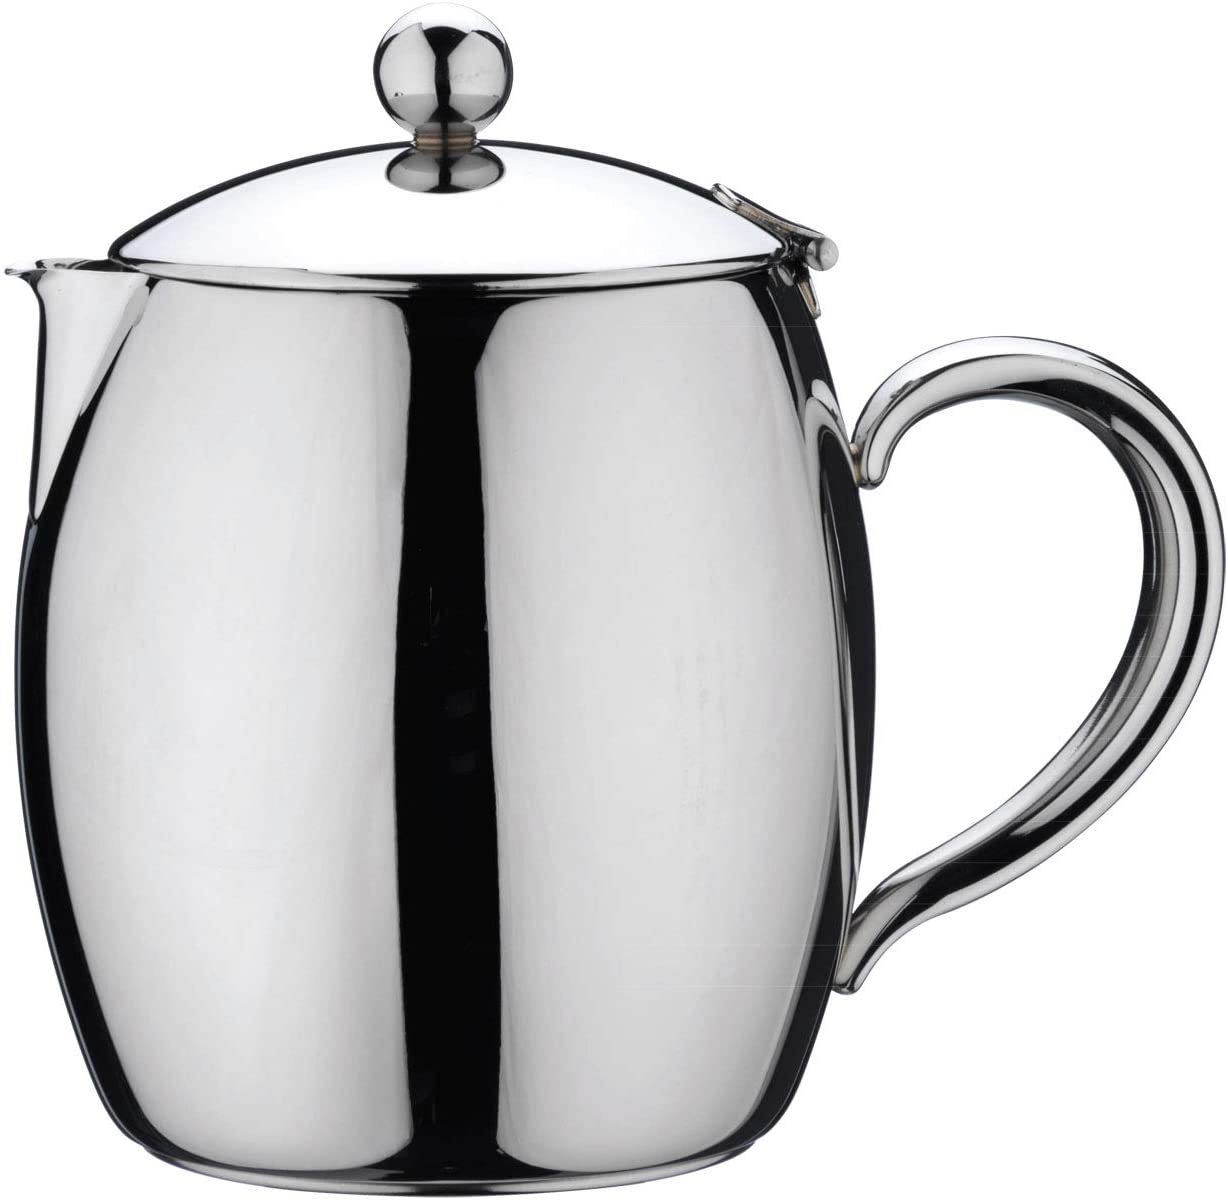 Cafe Stal Café Stål Bellux Collection BTP-14DW Double-Walled Teapot Made of High Quality 18/10 Stainless Steel - High Gloss Polish, 48oz